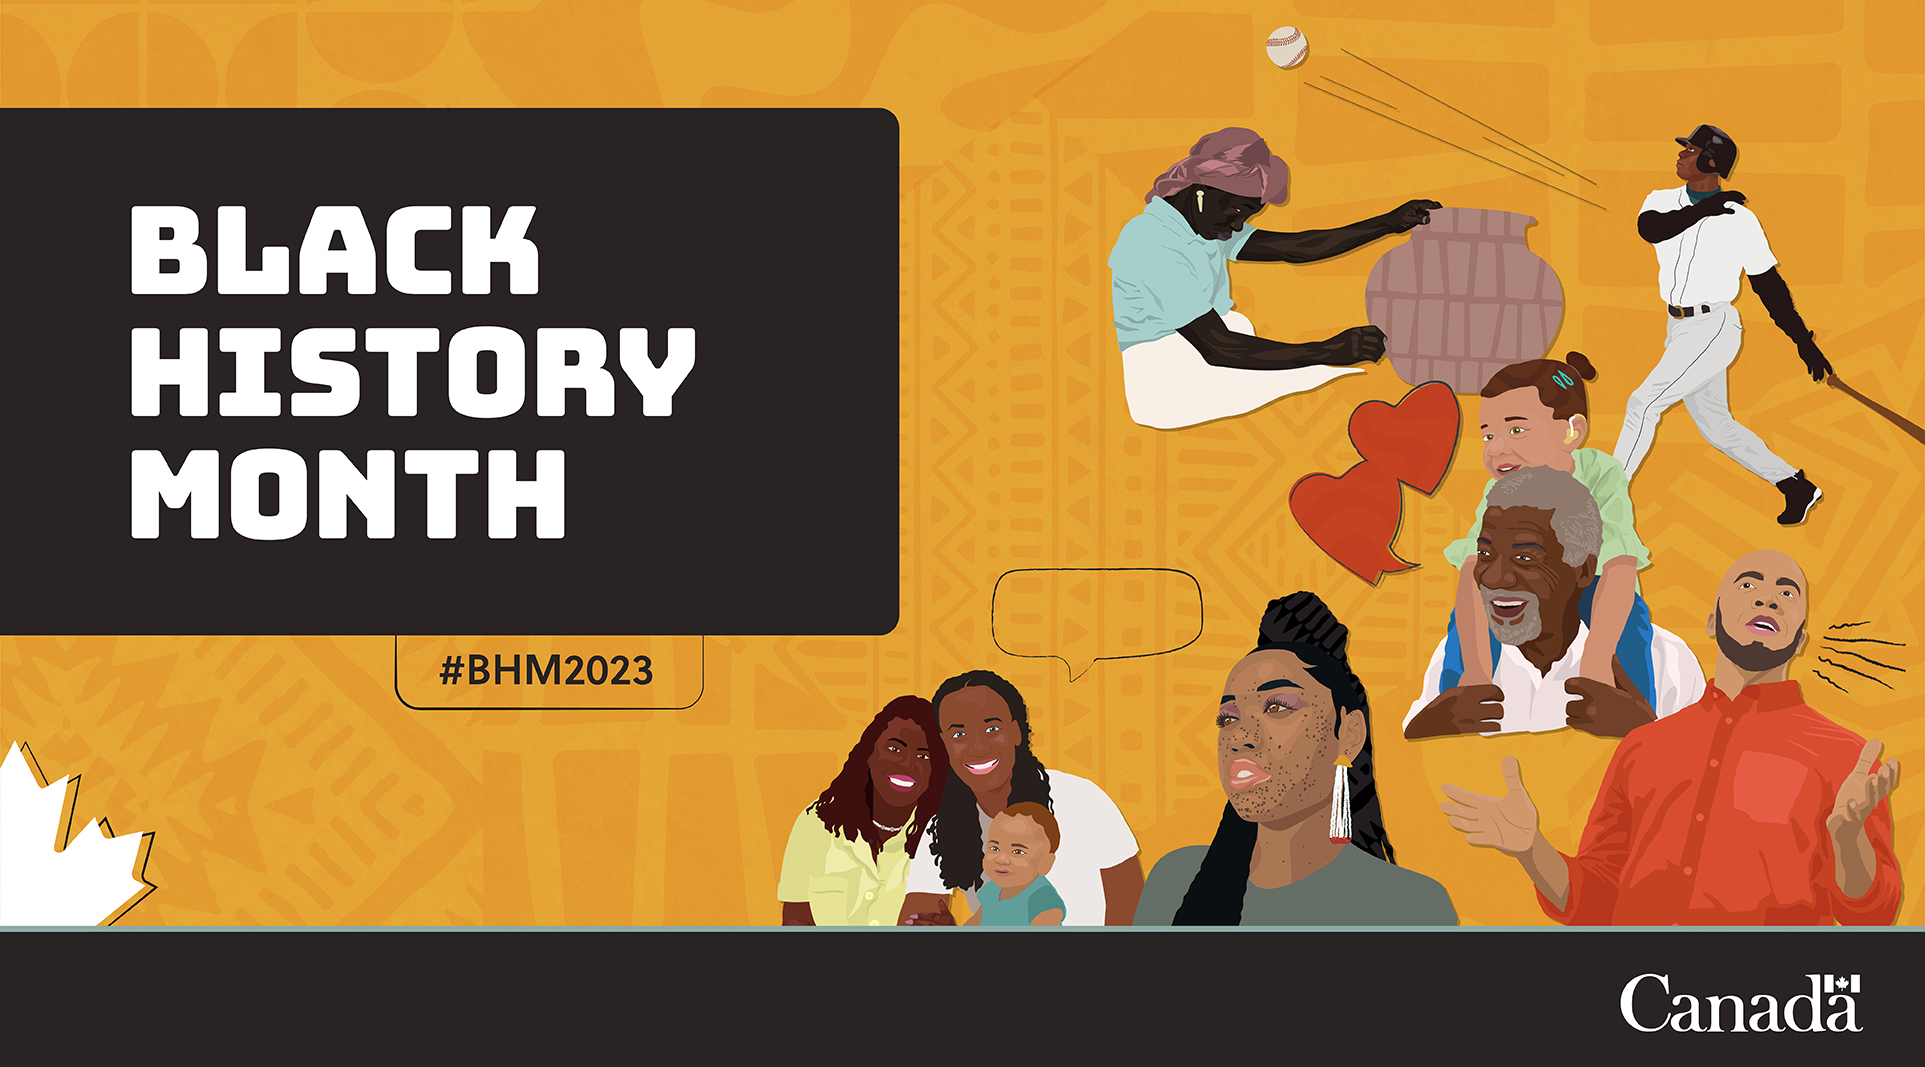 Visual for Facebook, Twitter or LinkedIn with the text Black History Month 2023